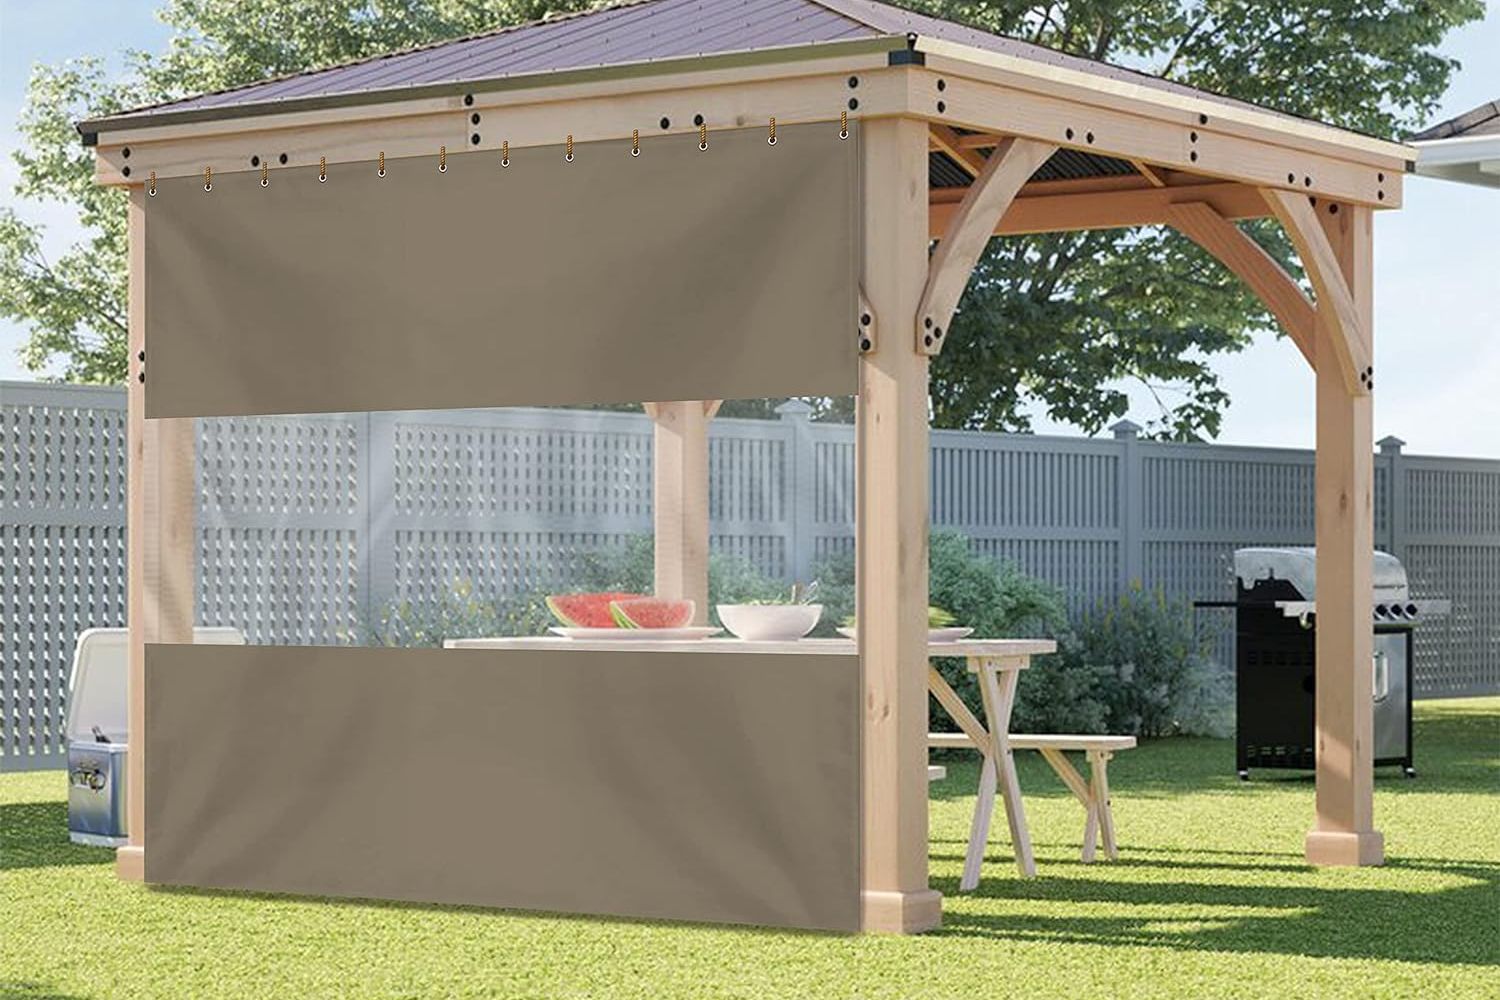 The Best Outdoor Curtains The Covers & All Outdoor Curtain With Clear Vinyl Panel installed along one edge of a pergola to provide privacy and shade for an outdoor picnic table.